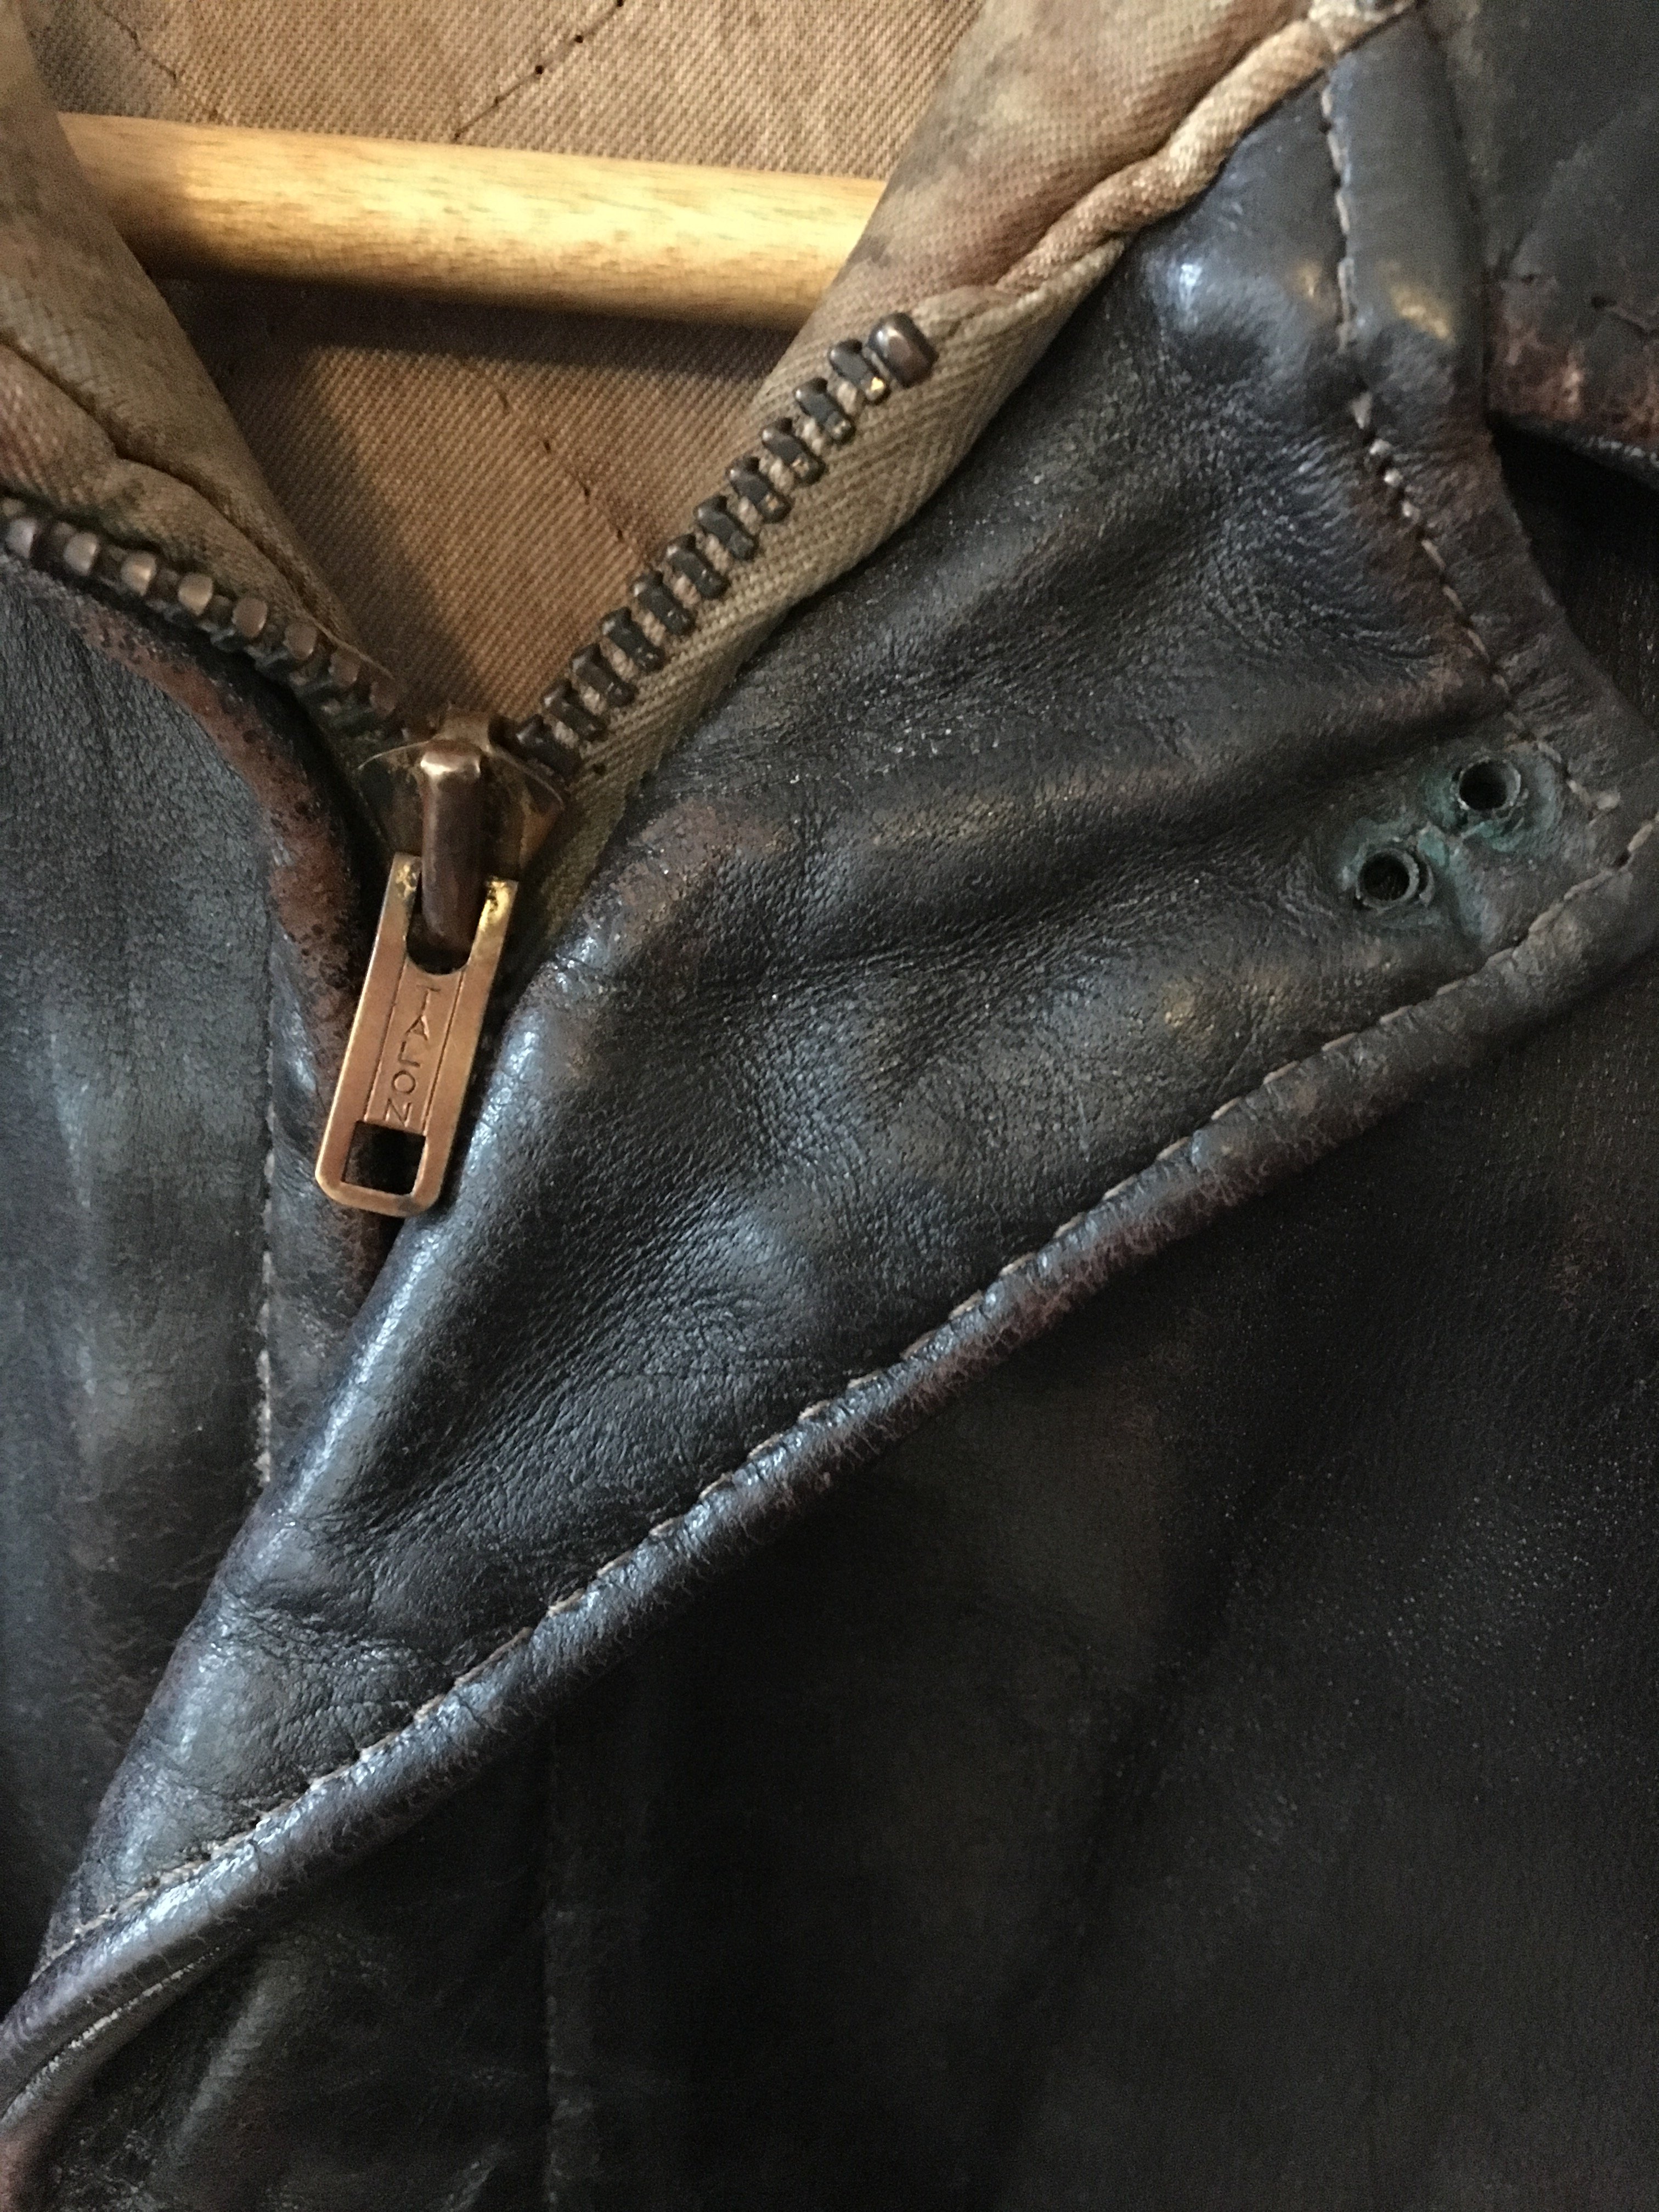 New to the forum and trying to work out the history of my old jacket ...